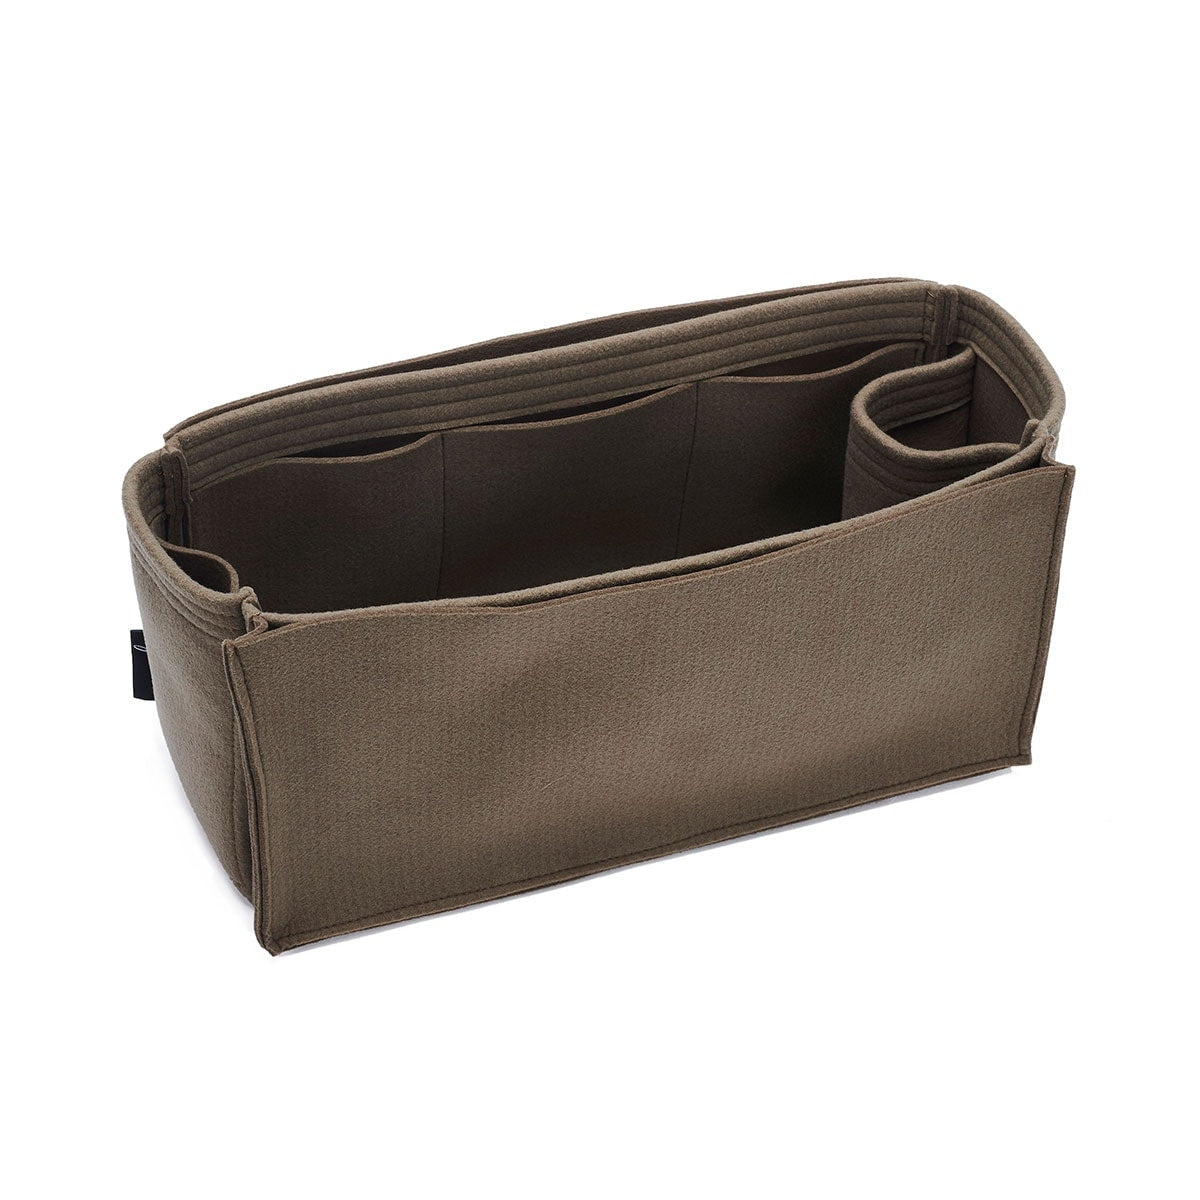 Deauville Canvas and Leather LARGE Bag Organizer Bag 